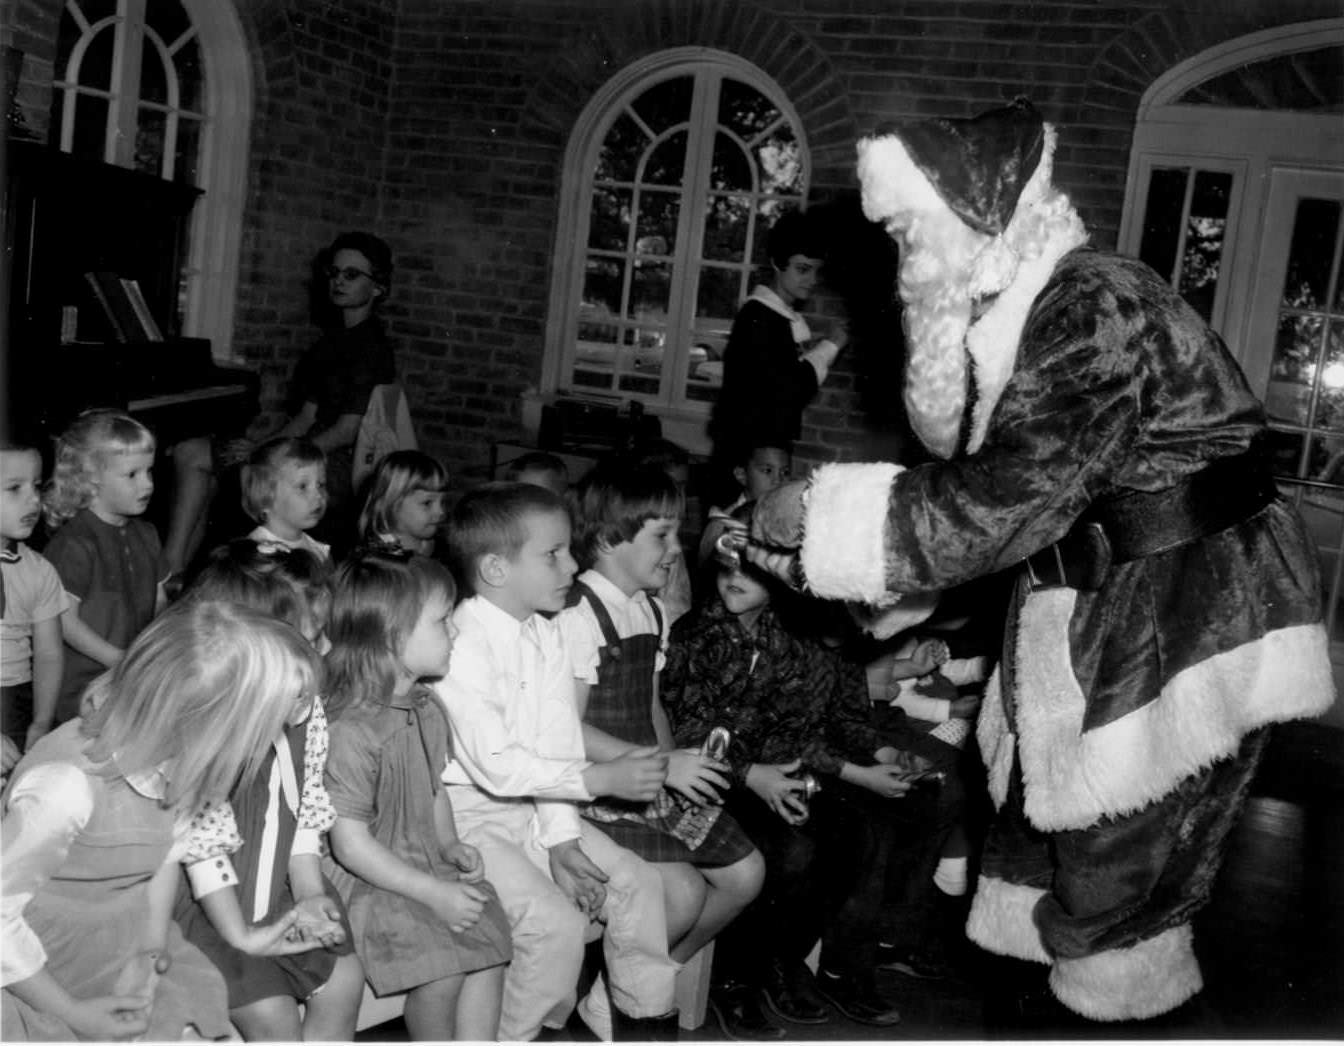 A Tiny Tot Christmas Party at Hancock Recreation Center. Santa Claus hands out candy canes to a group of children, 1966